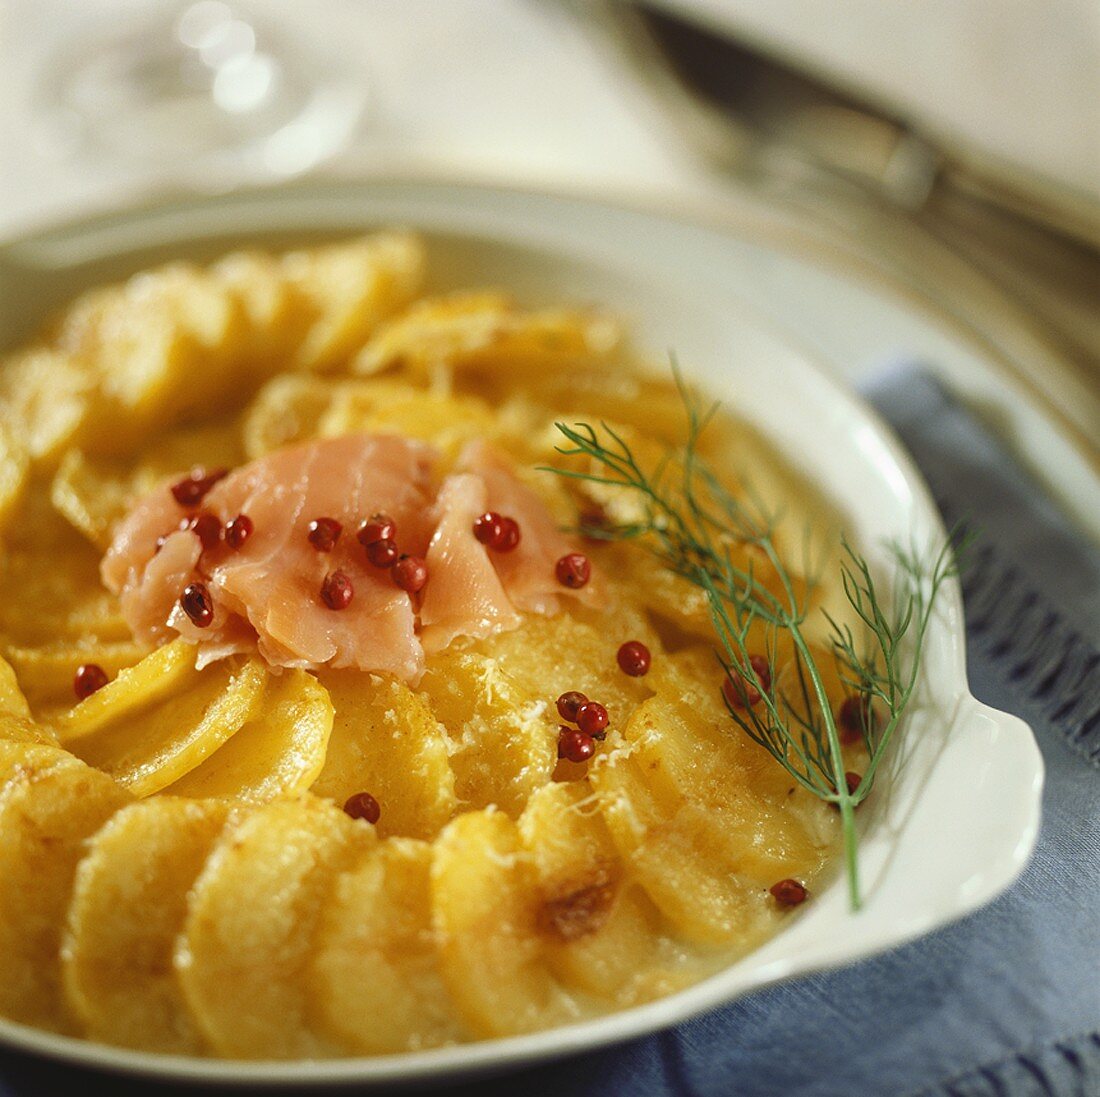 Potato gratin with smoked salmon and red peppercorns